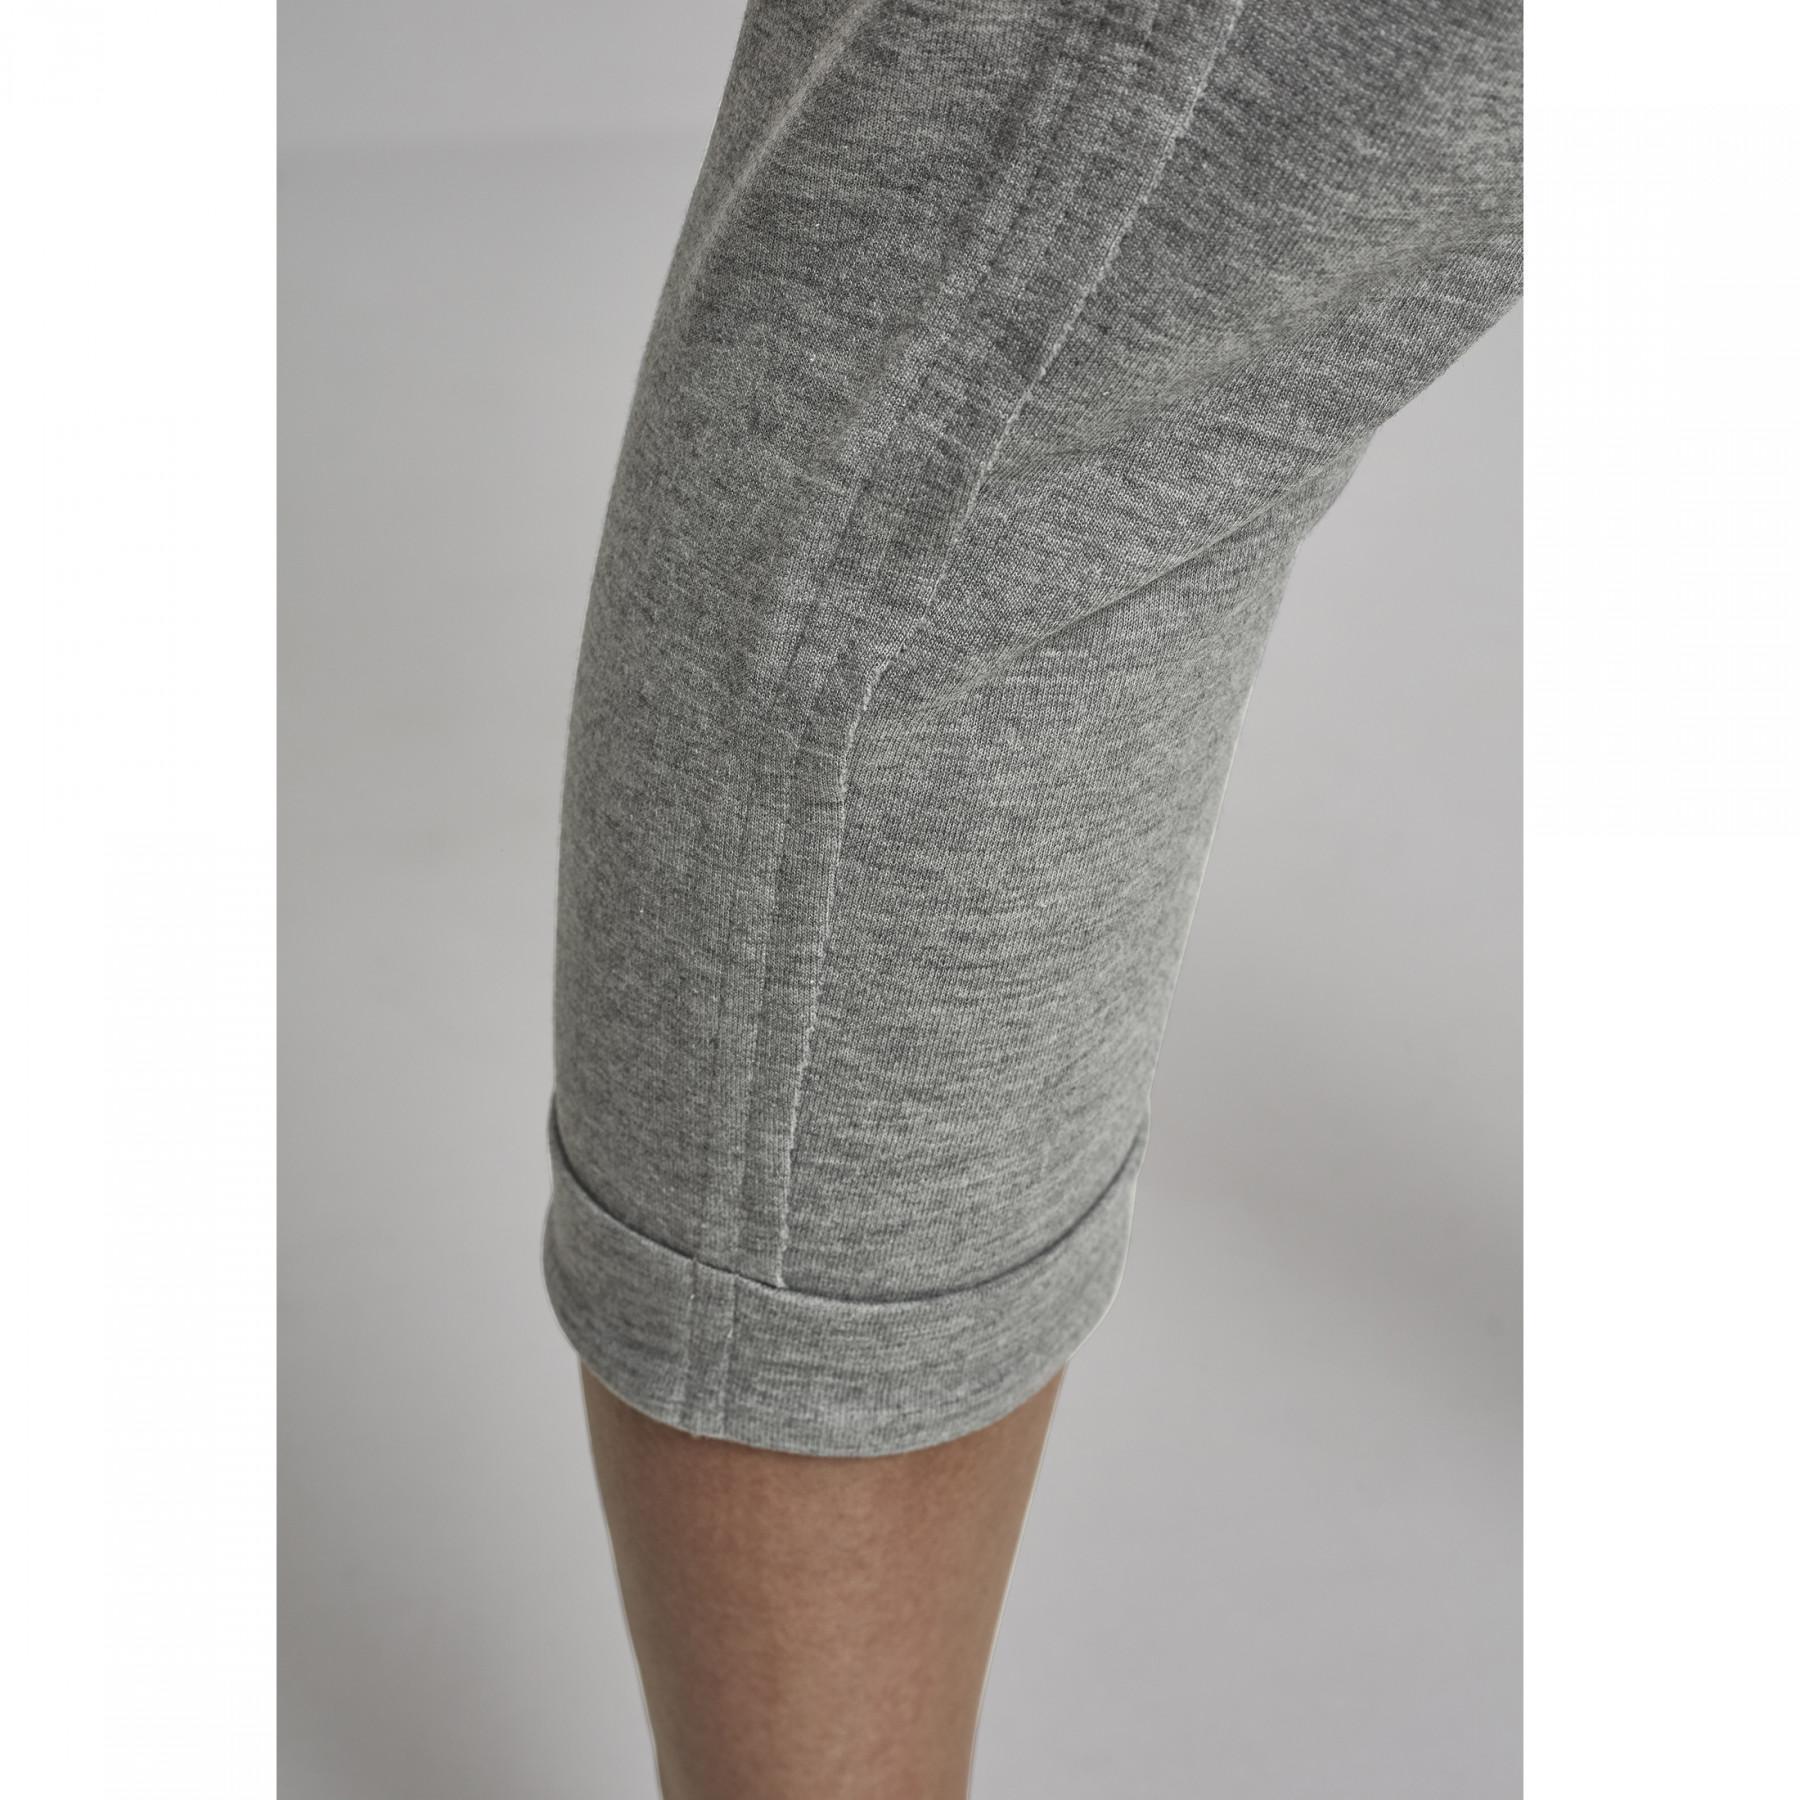 Pant woman Urban Classic terry GT